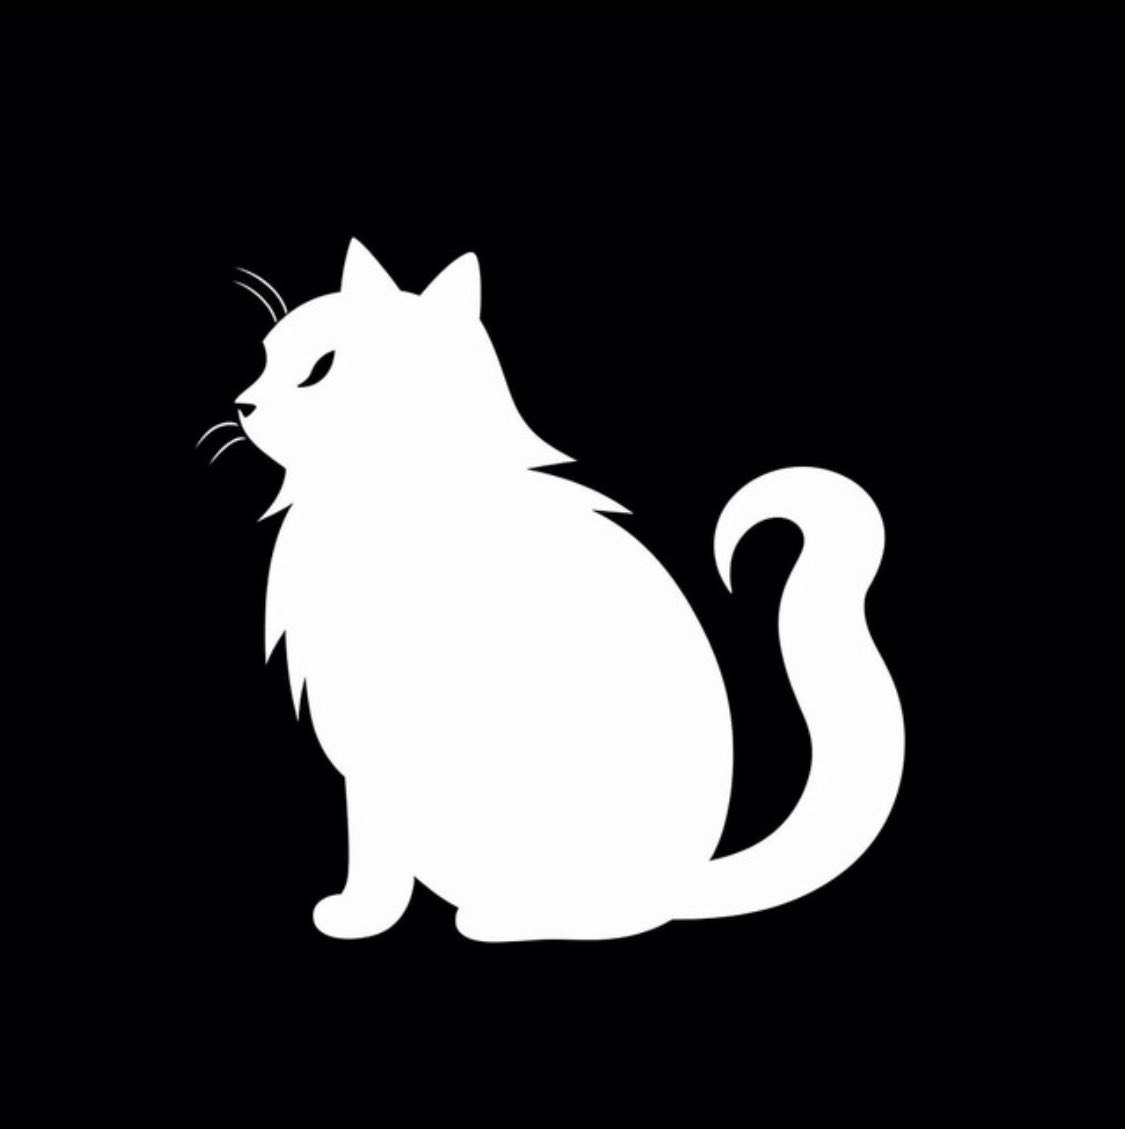 @JakeGagain $NEKO! 🚀
$NEKO! 🚀
$NEKO! 🚀

🐾 Join the purr-fect revolution in the crypto world with $NEKO! 🚀 

🌐 Discover a vibrant community that's passionate about feline-inspired innovation. Don't miss your chance to be part of this groundbreaking journey! 

💎 Invest in $NEKO today…